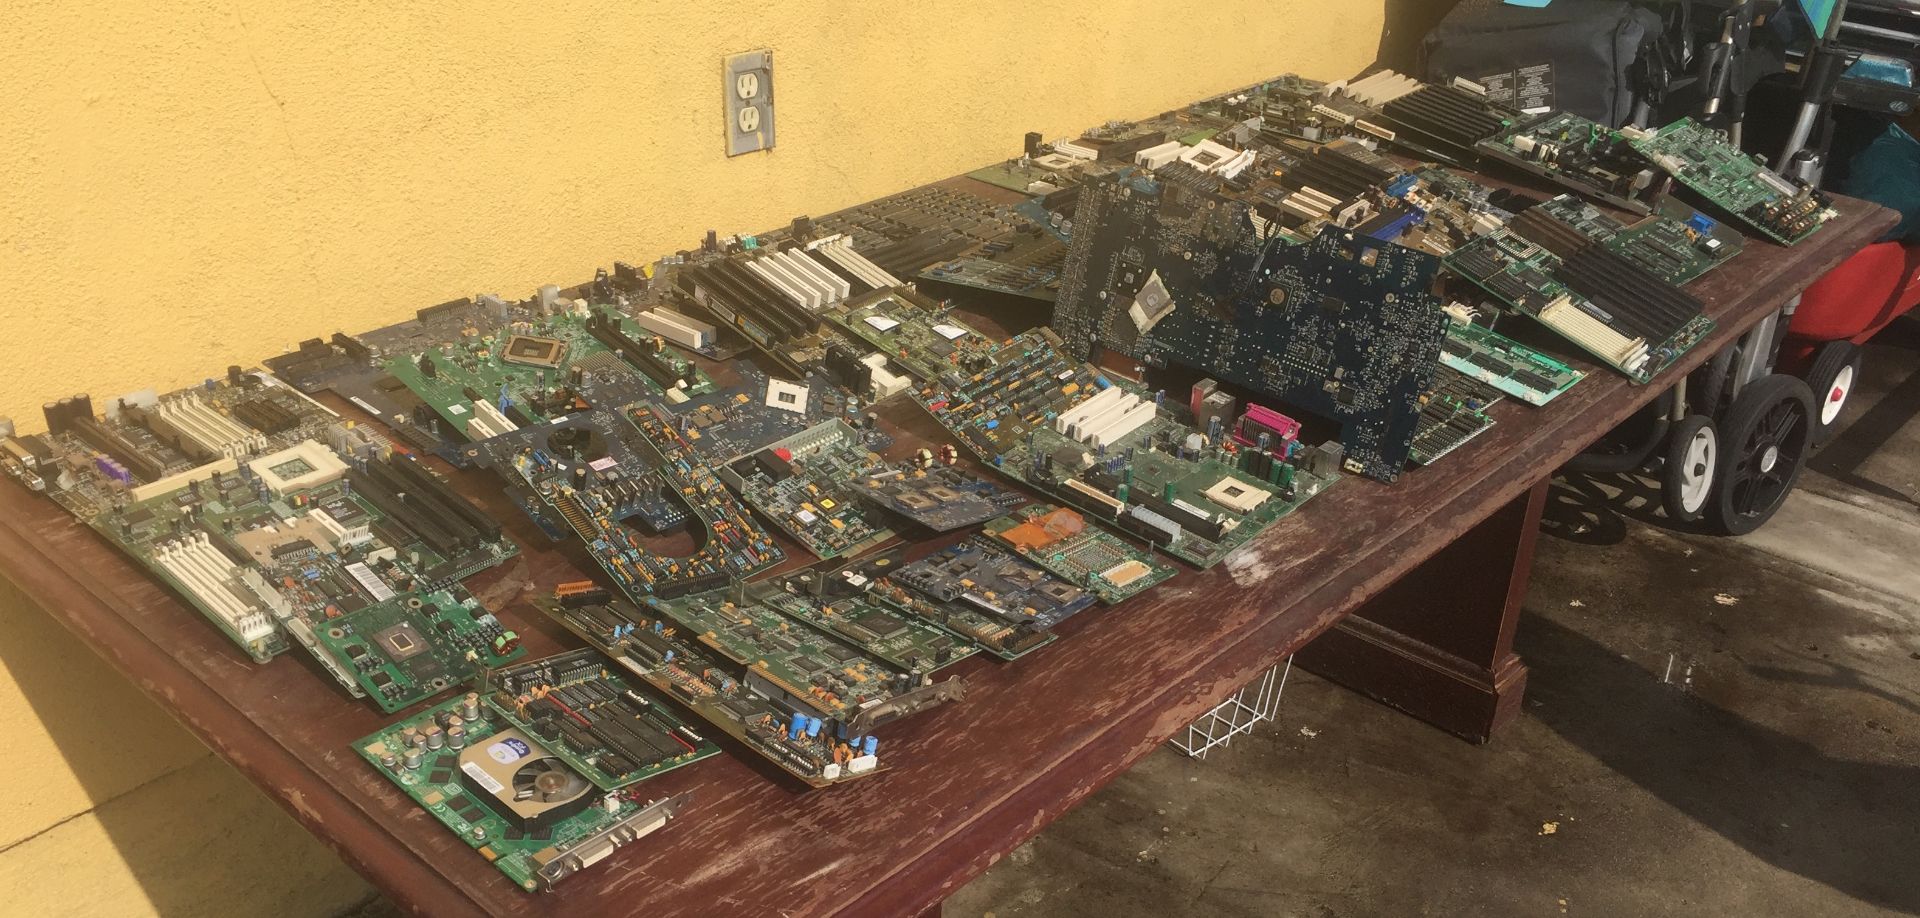 TABLE OF CIRCUIT BOARDS ALL SIZES